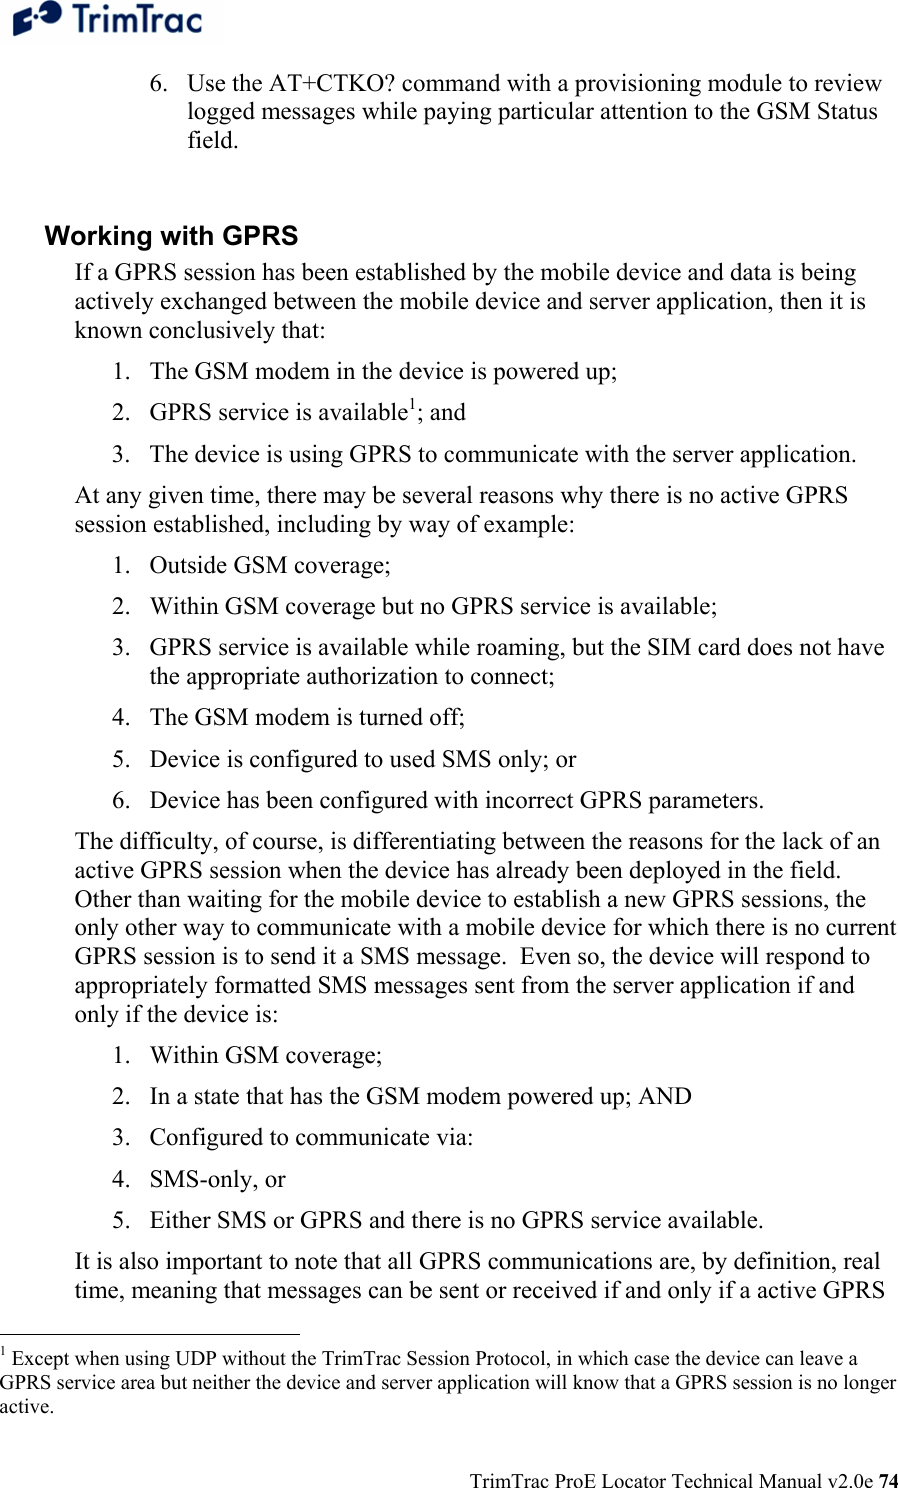  TrimTrac ProE Locator Technical Manual v2.0e 74 6. Use the AT+CTKO? command with a provisioning module to review logged messages while paying particular attention to the GSM Status field.   Working with GPRS If a GPRS session has been established by the mobile device and data is being actively exchanged between the mobile device and server application, then it is known conclusively that: 1. The GSM modem in the device is powered up; 2. GPRS service is available1; and 3. The device is using GPRS to communicate with the server application. At any given time, there may be several reasons why there is no active GPRS session established, including by way of example:  1. Outside GSM coverage; 2. Within GSM coverage but no GPRS service is available; 3. GPRS service is available while roaming, but the SIM card does not have the appropriate authorization to connect; 4. The GSM modem is turned off; 5. Device is configured to used SMS only; or 6. Device has been configured with incorrect GPRS parameters. The difficulty, of course, is differentiating between the reasons for the lack of an active GPRS session when the device has already been deployed in the field.  Other than waiting for the mobile device to establish a new GPRS sessions, the only other way to communicate with a mobile device for which there is no current GPRS session is to send it a SMS message.  Even so, the device will respond to appropriately formatted SMS messages sent from the server application if and only if the device is: 1. Within GSM coverage; 2. In a state that has the GSM modem powered up; AND 3. Configured to communicate via:  4. SMS-only, or  5. Either SMS or GPRS and there is no GPRS service available. It is also important to note that all GPRS communications are, by definition, real time, meaning that messages can be sent or received if and only if a active GPRS                                                  1 Except when using UDP without the TrimTrac Session Protocol, in which case the device can leave a GPRS service area but neither the device and server application will know that a GPRS session is no longer active. 